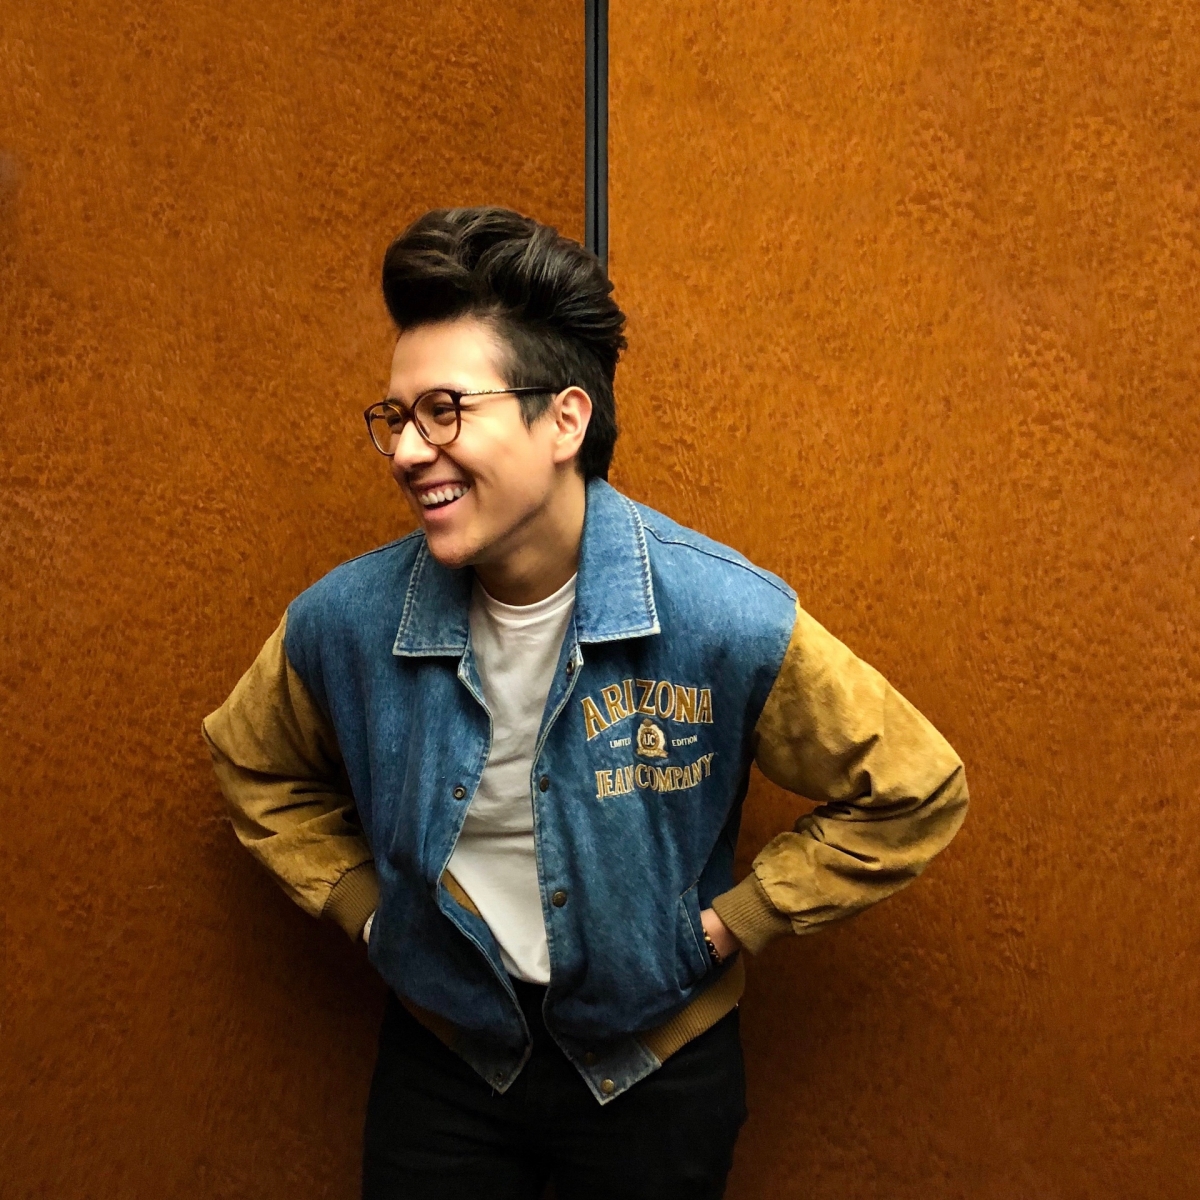 Antonio Gonzalez wears a denim jacket with suede sleeves and glasses, he smiles looking away from the camera. 